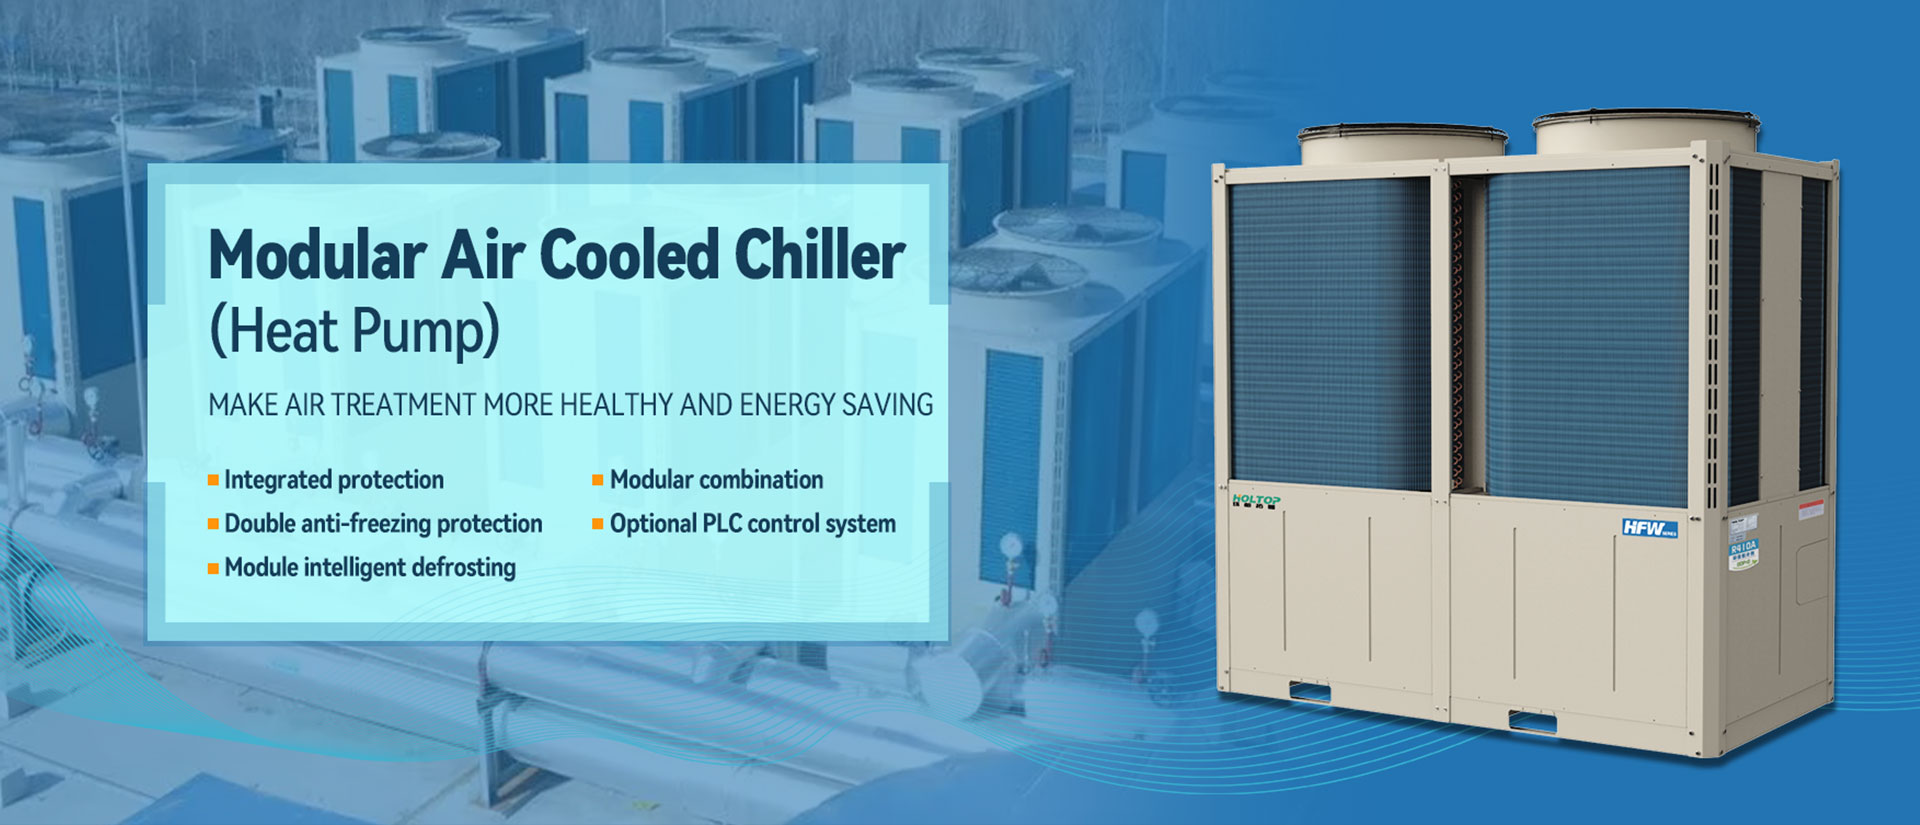 Holtop Modular Air Cooled Chiller